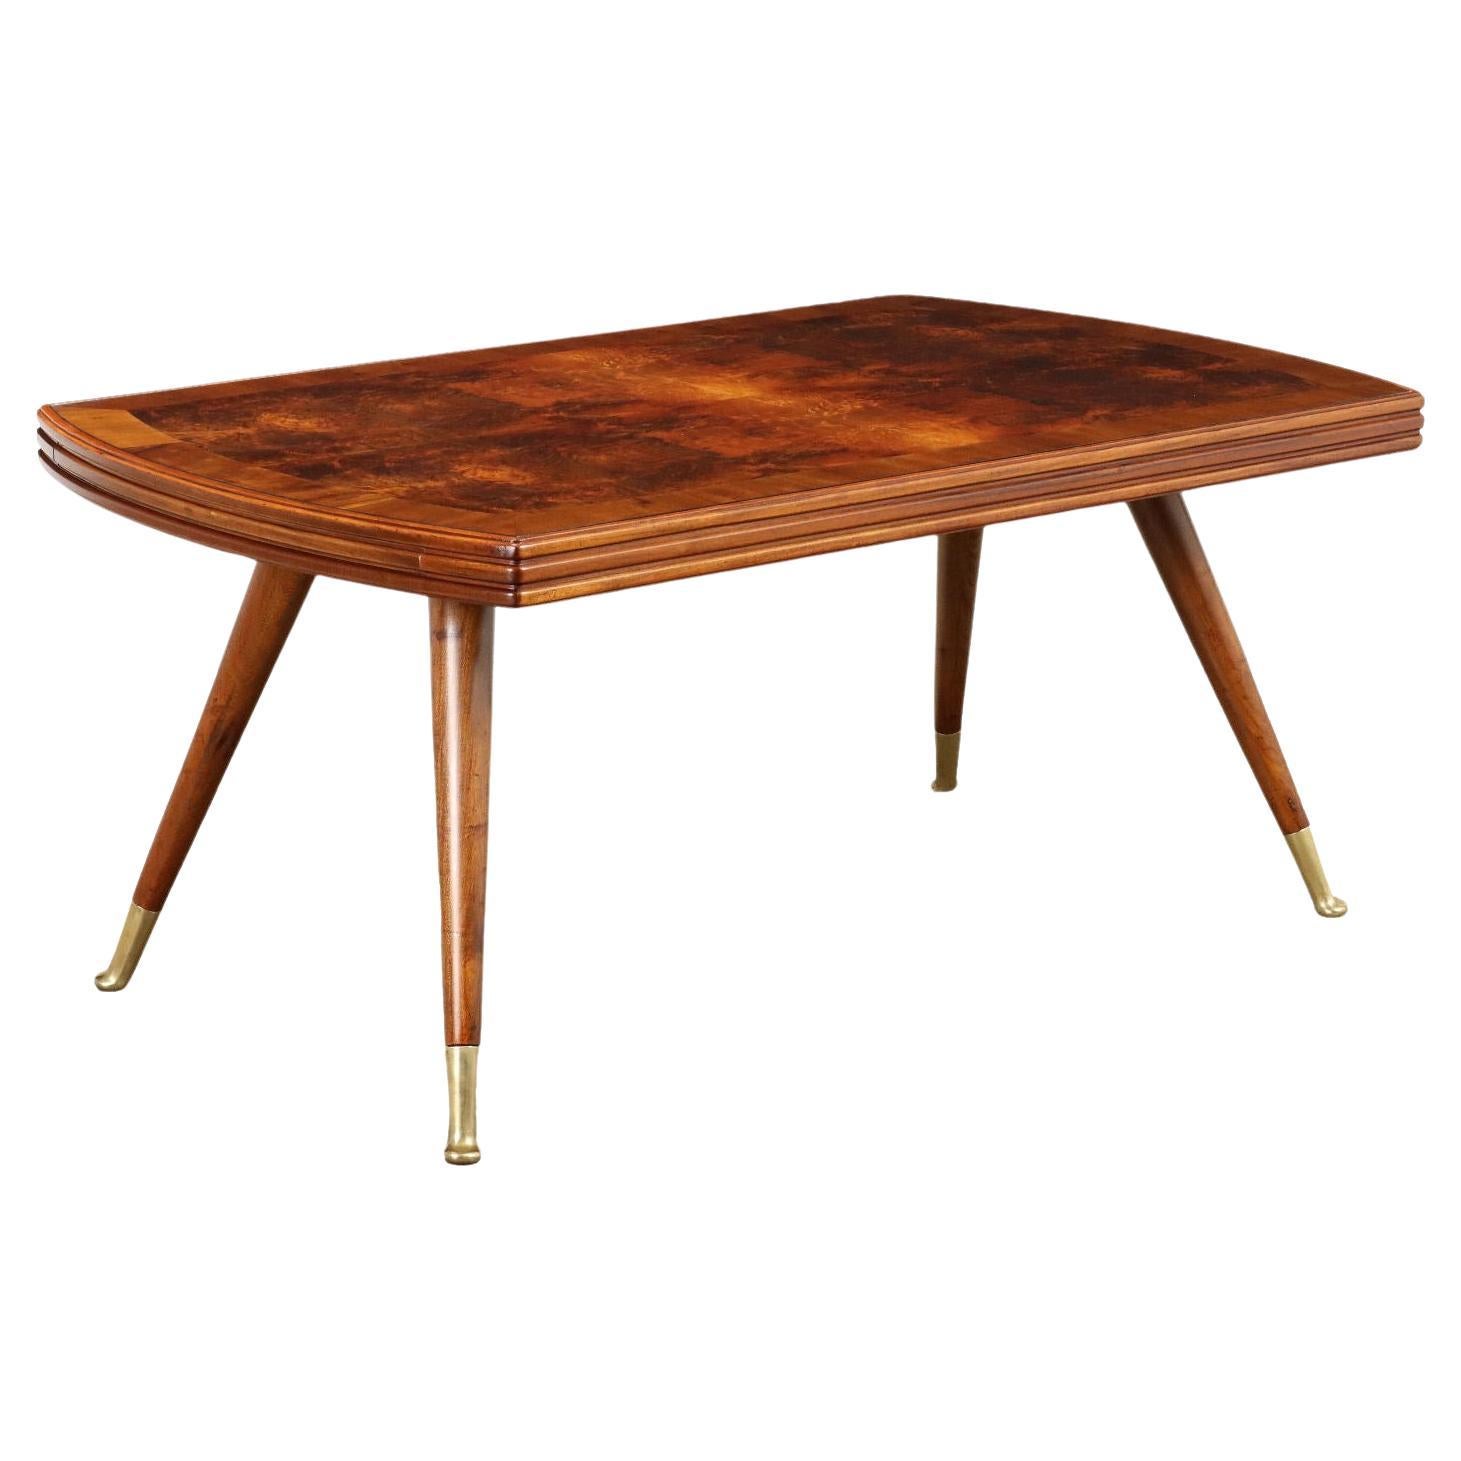 Argentine stained beechwood rectangular table 1950s